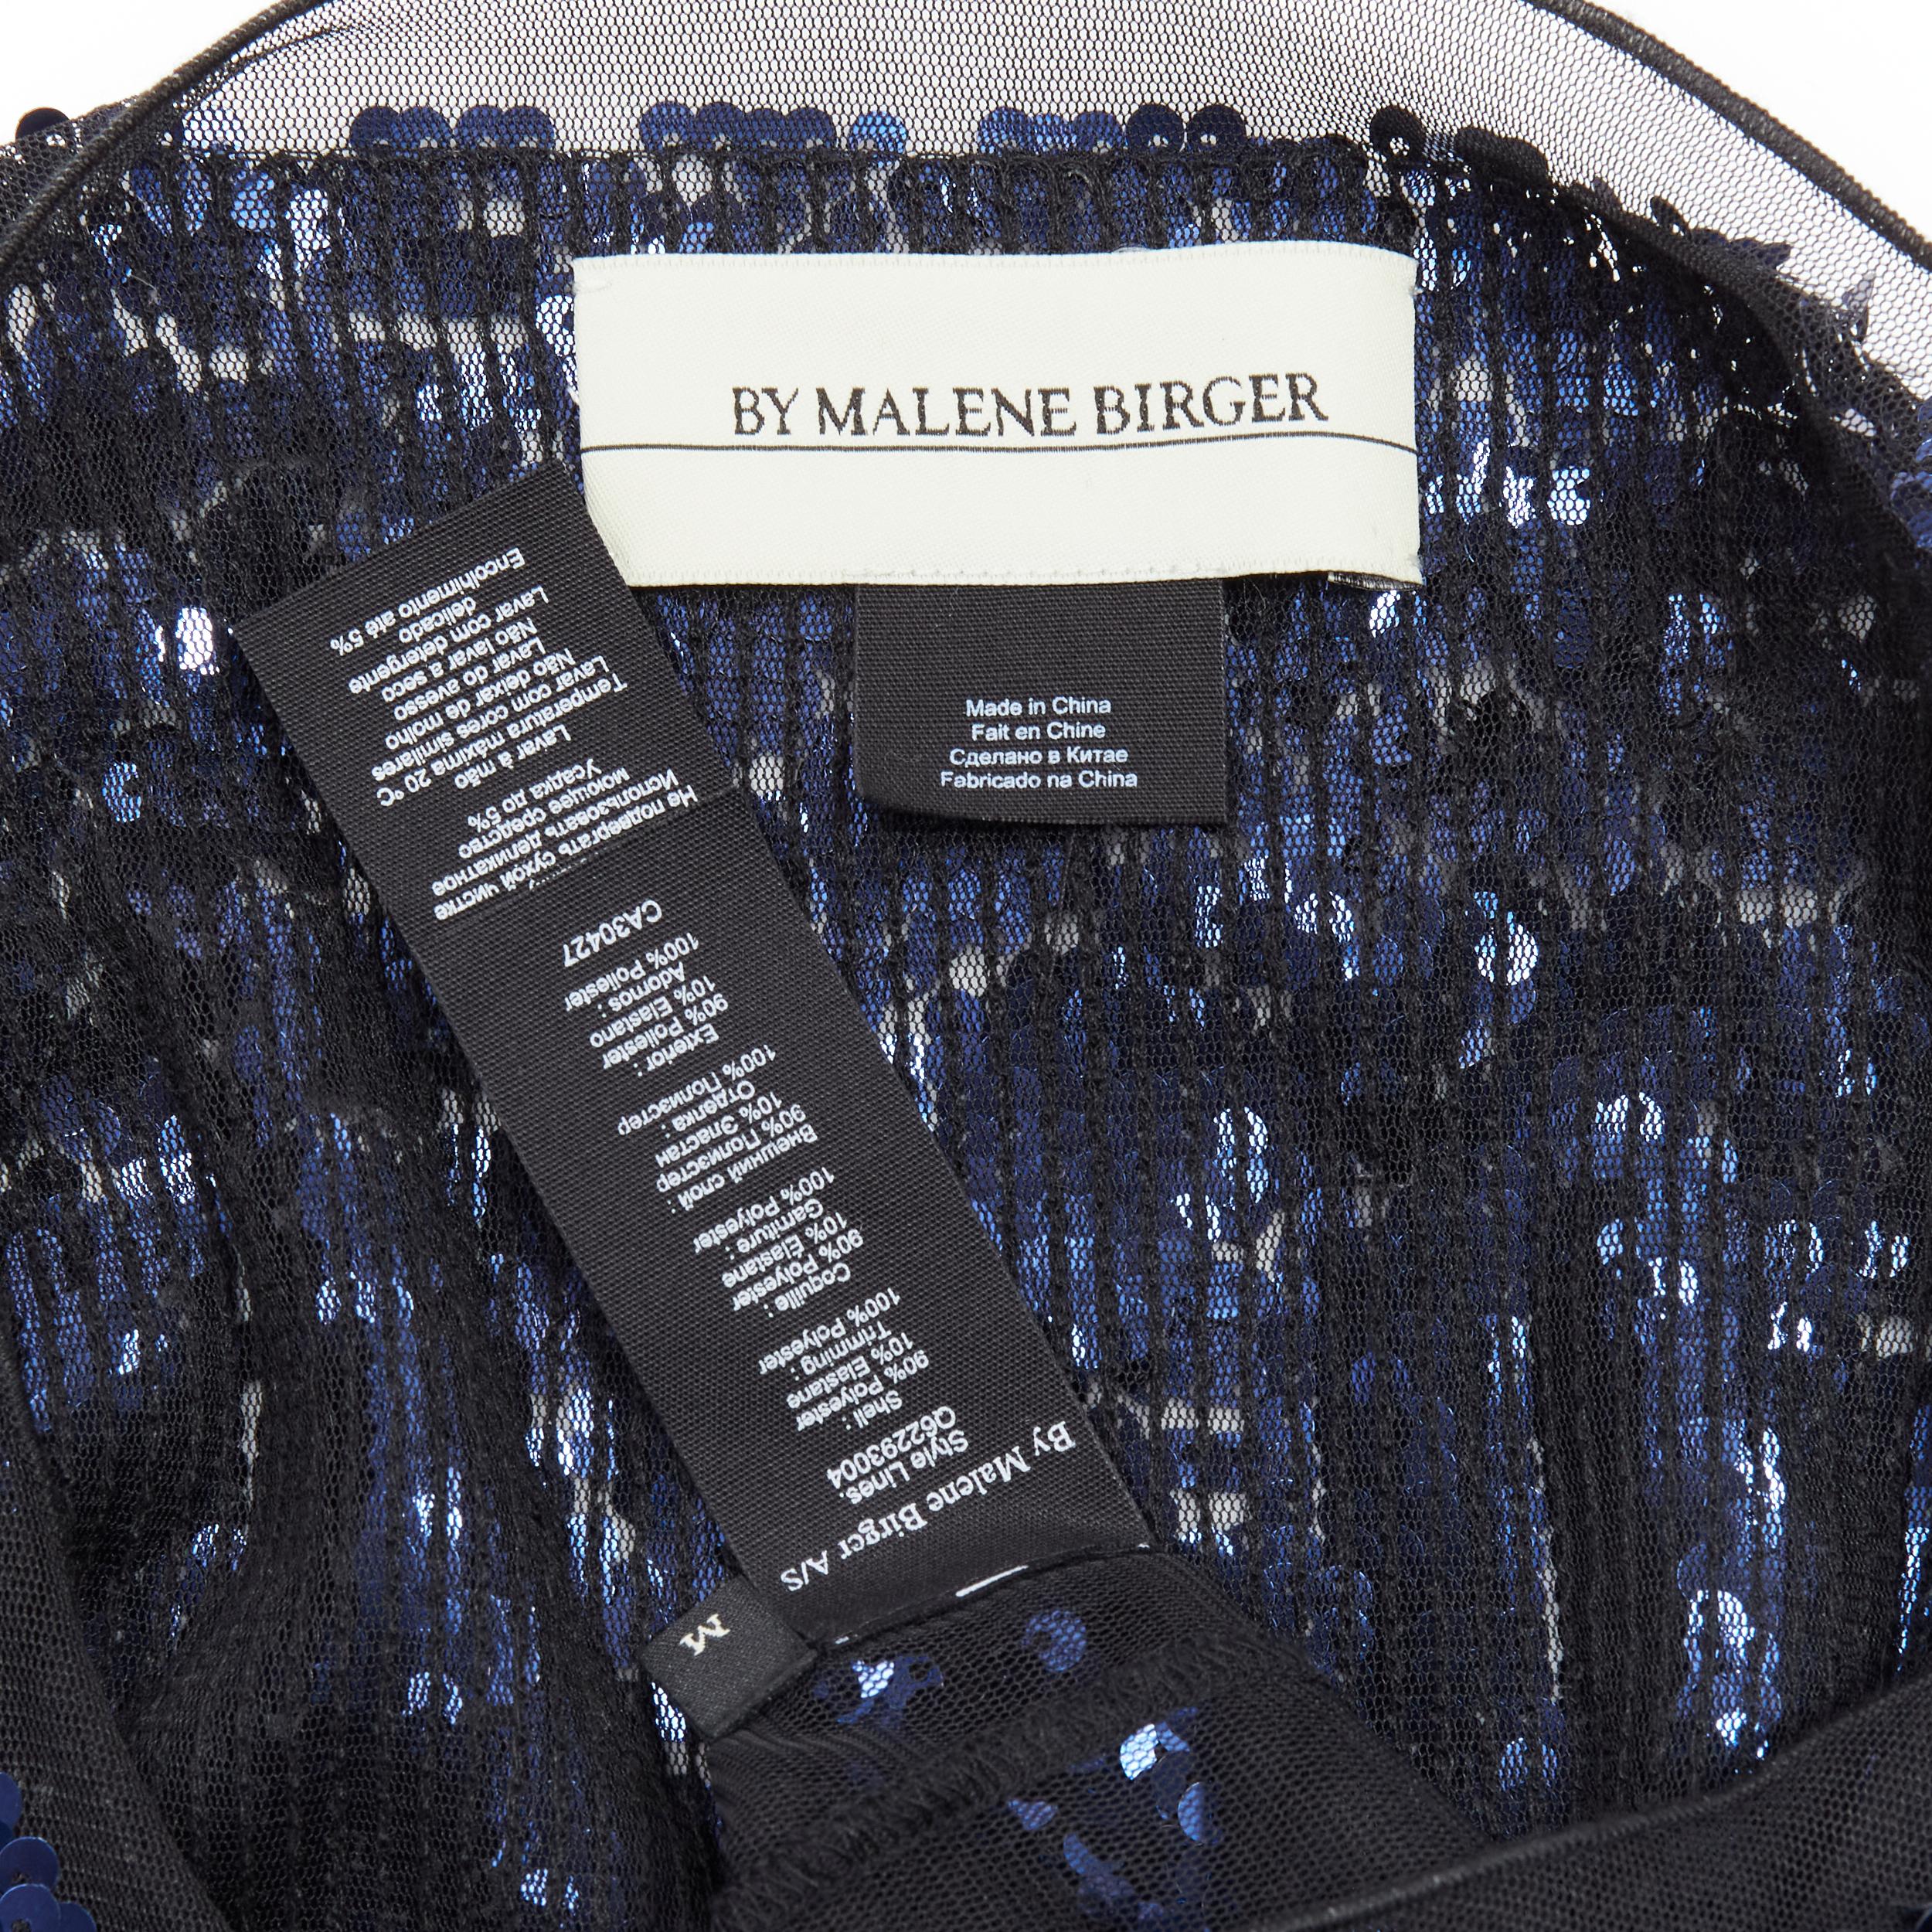 BY MALENE BIRGER blue sequins overlay black sheer evening gown dress M For Sale 5